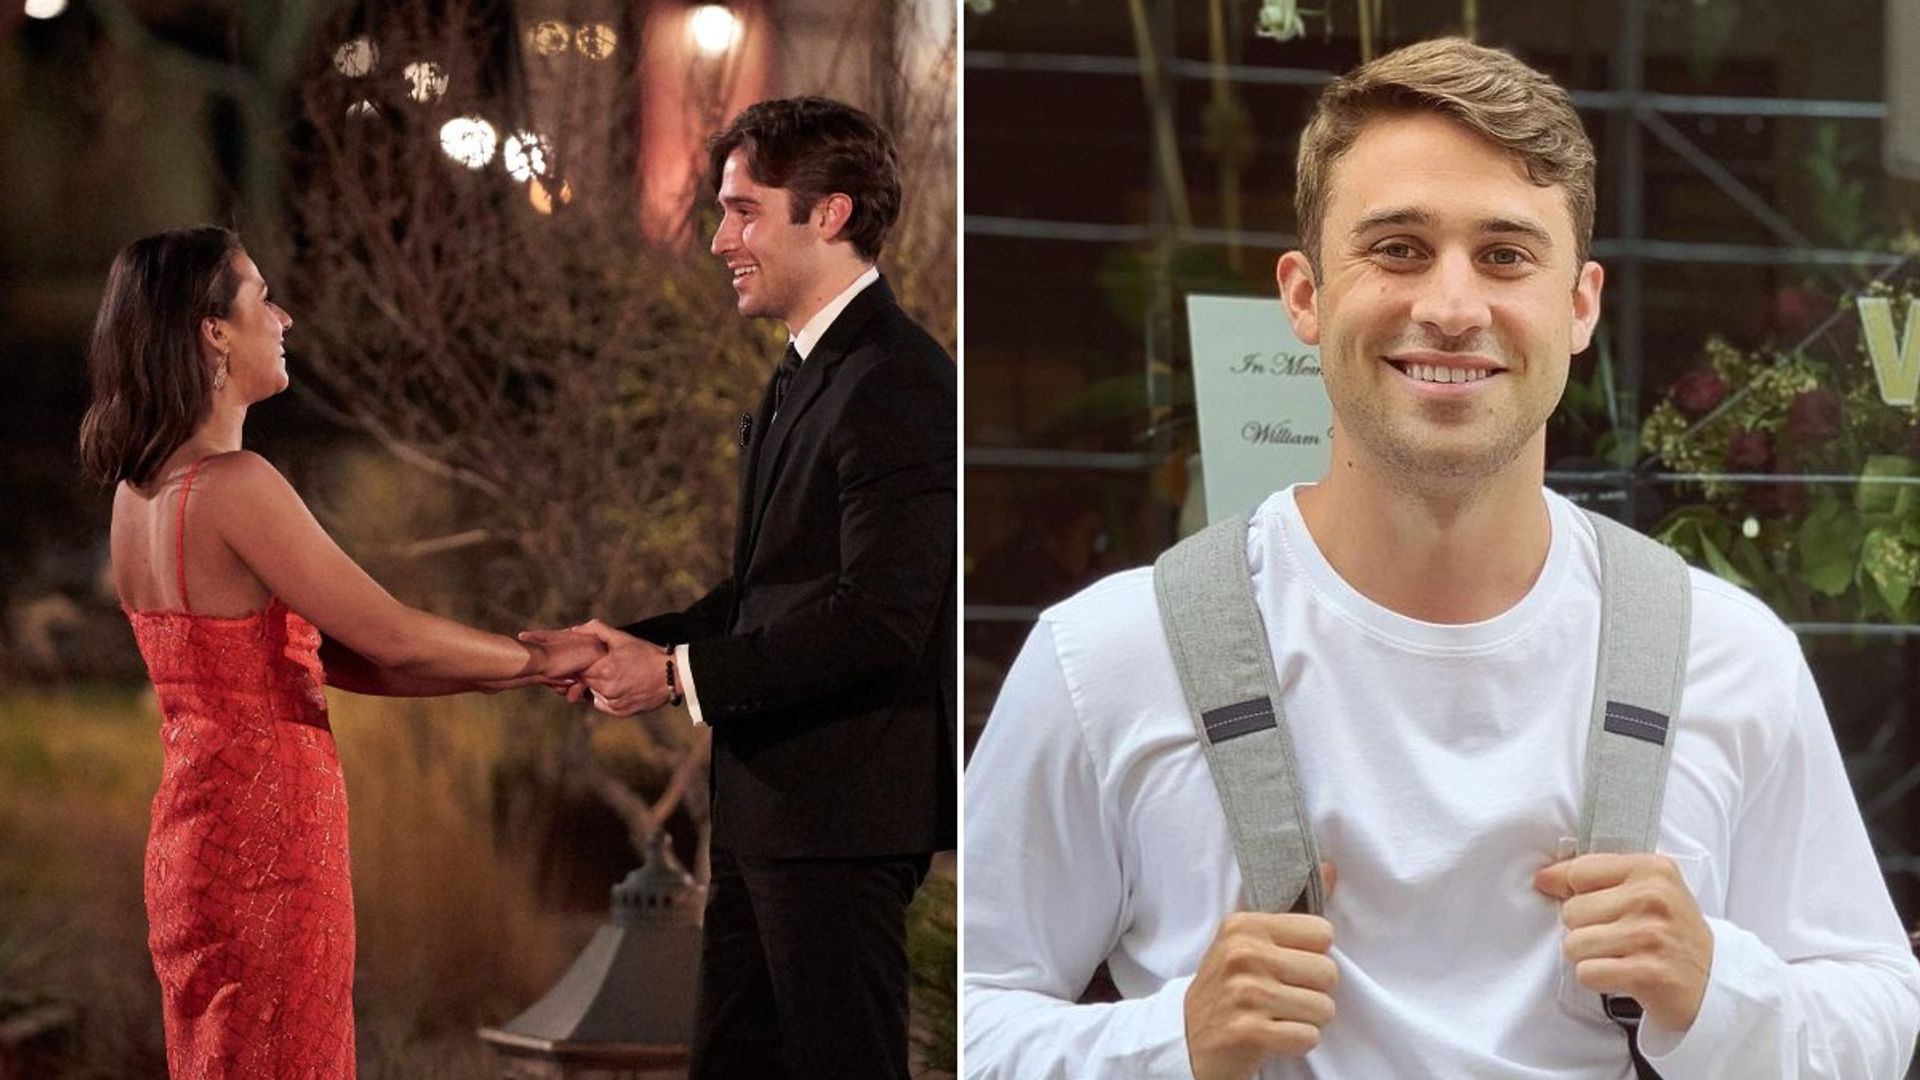 The Bachelorette: Everything you need to know about Katie Thurston's love interest Greg Grippo